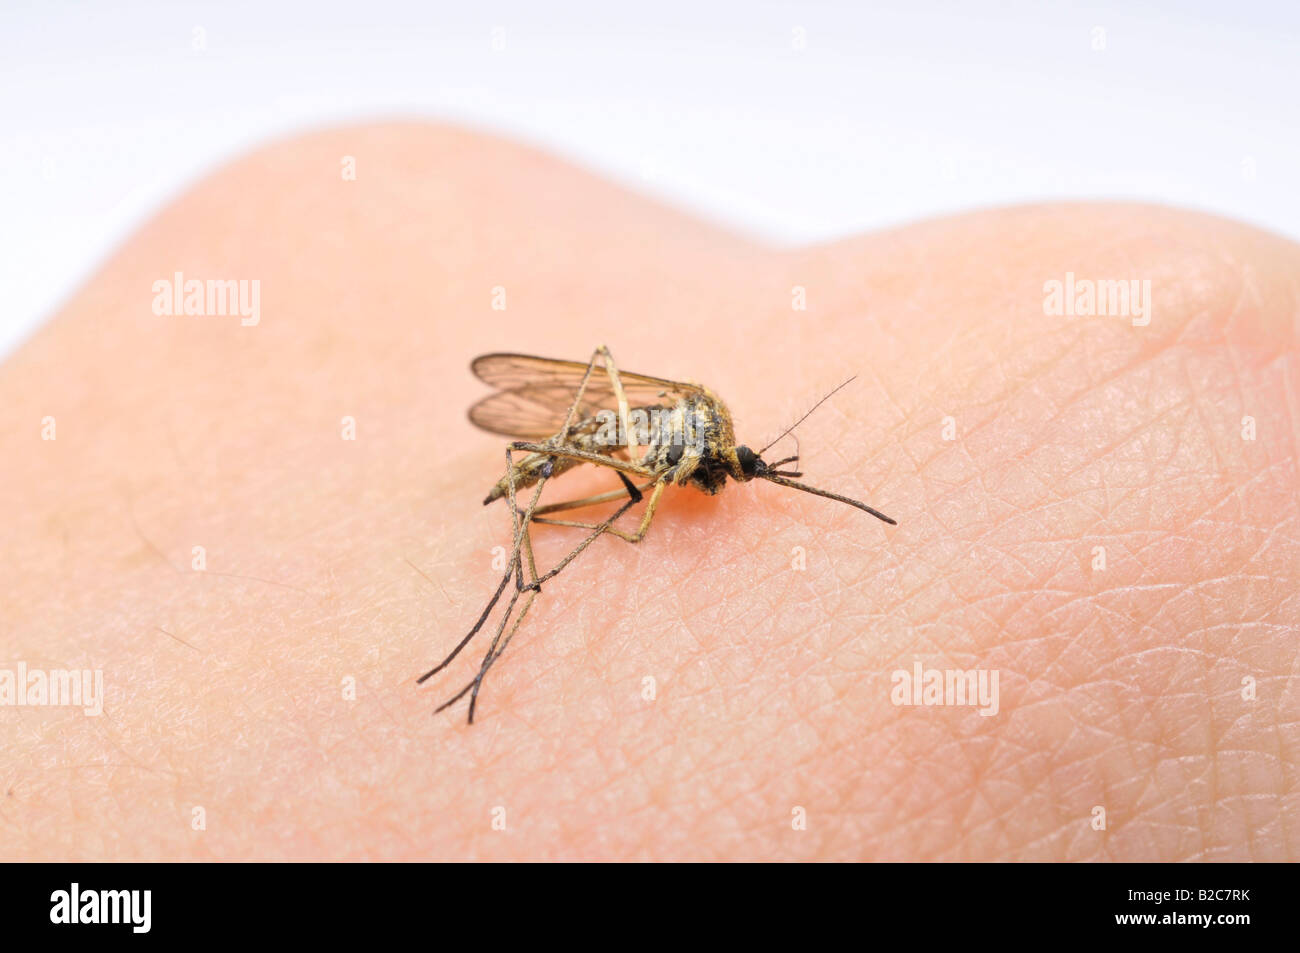 Dead Common House Mosquito (Culex pipiens) on a hand Stock Photo